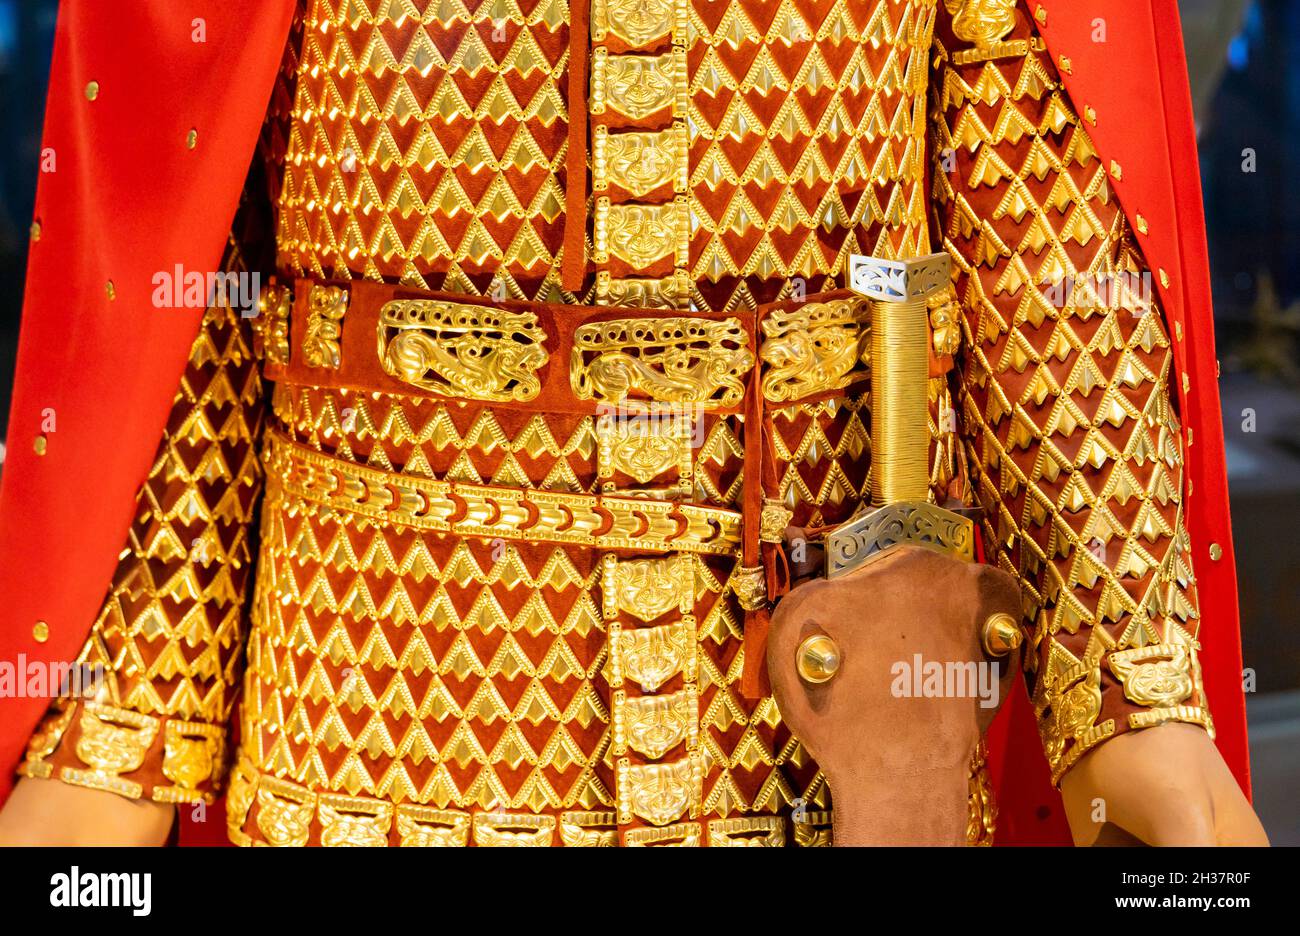 Body armor, sword of Golden Man; a noble Saka warrior of V-IV century BC. Costume and equipment reconstruction, Museum in Nur-Sultan, Kazakhstan Stock Photo